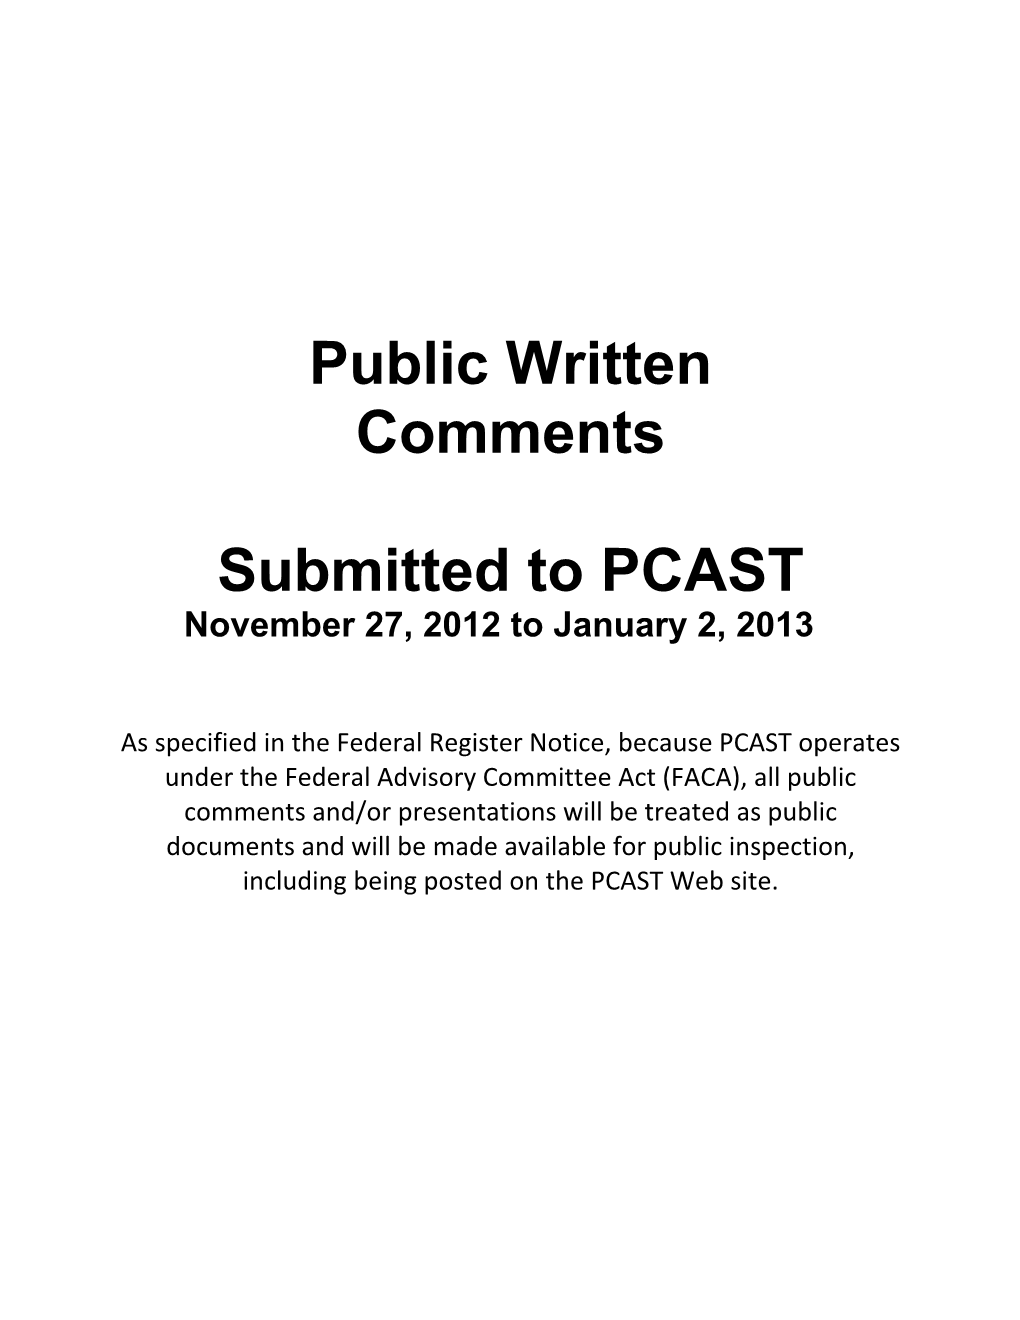 Public Written Comments Submitted to PCAST